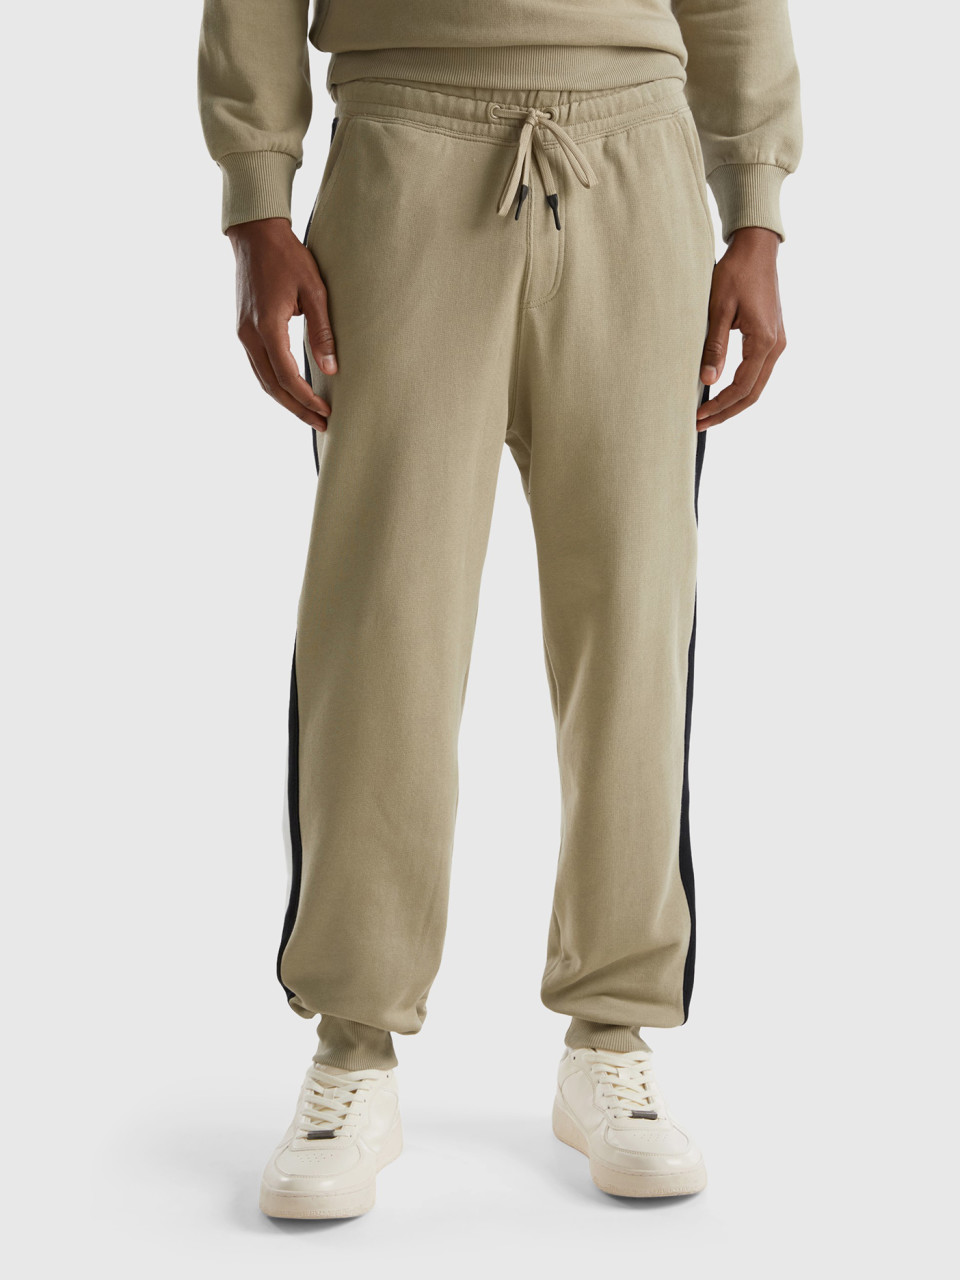 Benetton, Sage Green Joggers With Stripes, Light Green, Men